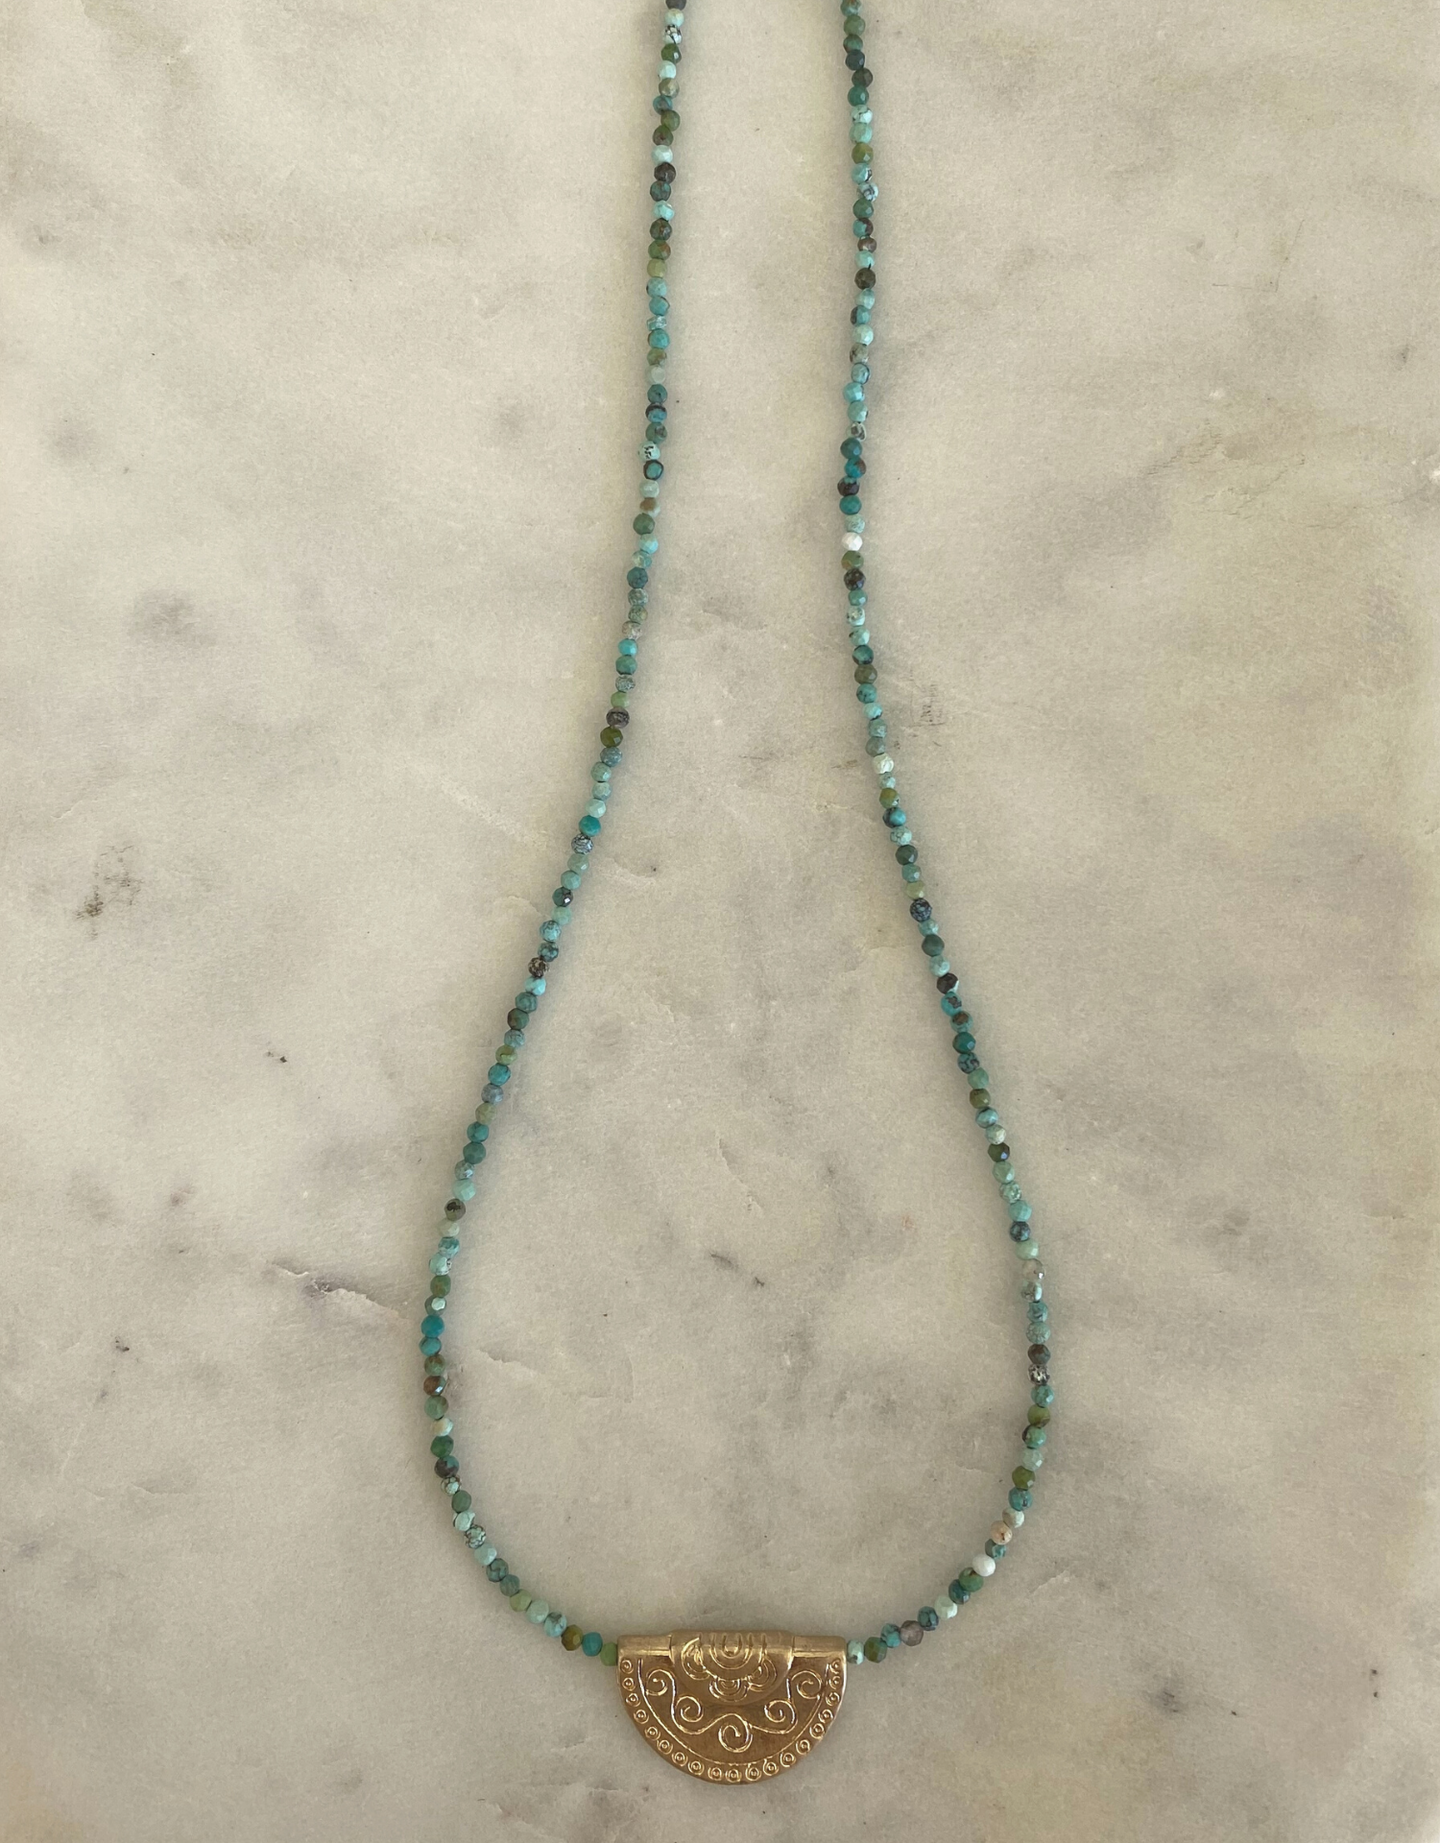 Sophia Scroll Necklace - Turquoise